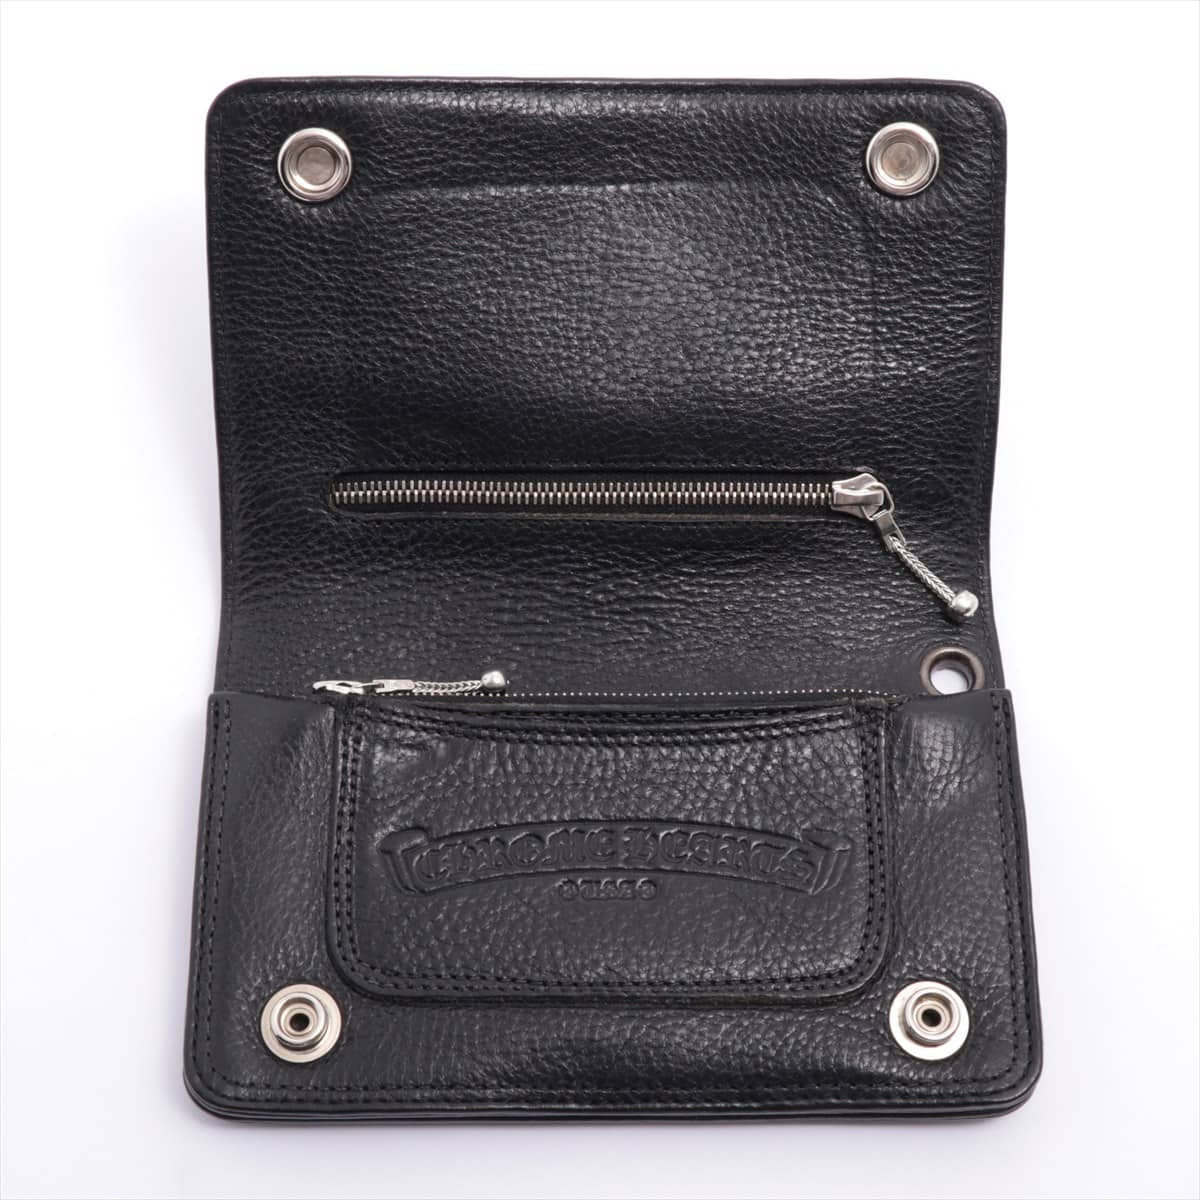 Chrome Hearts Cross button 2 Zips Wallet Wallet Leather With invoice